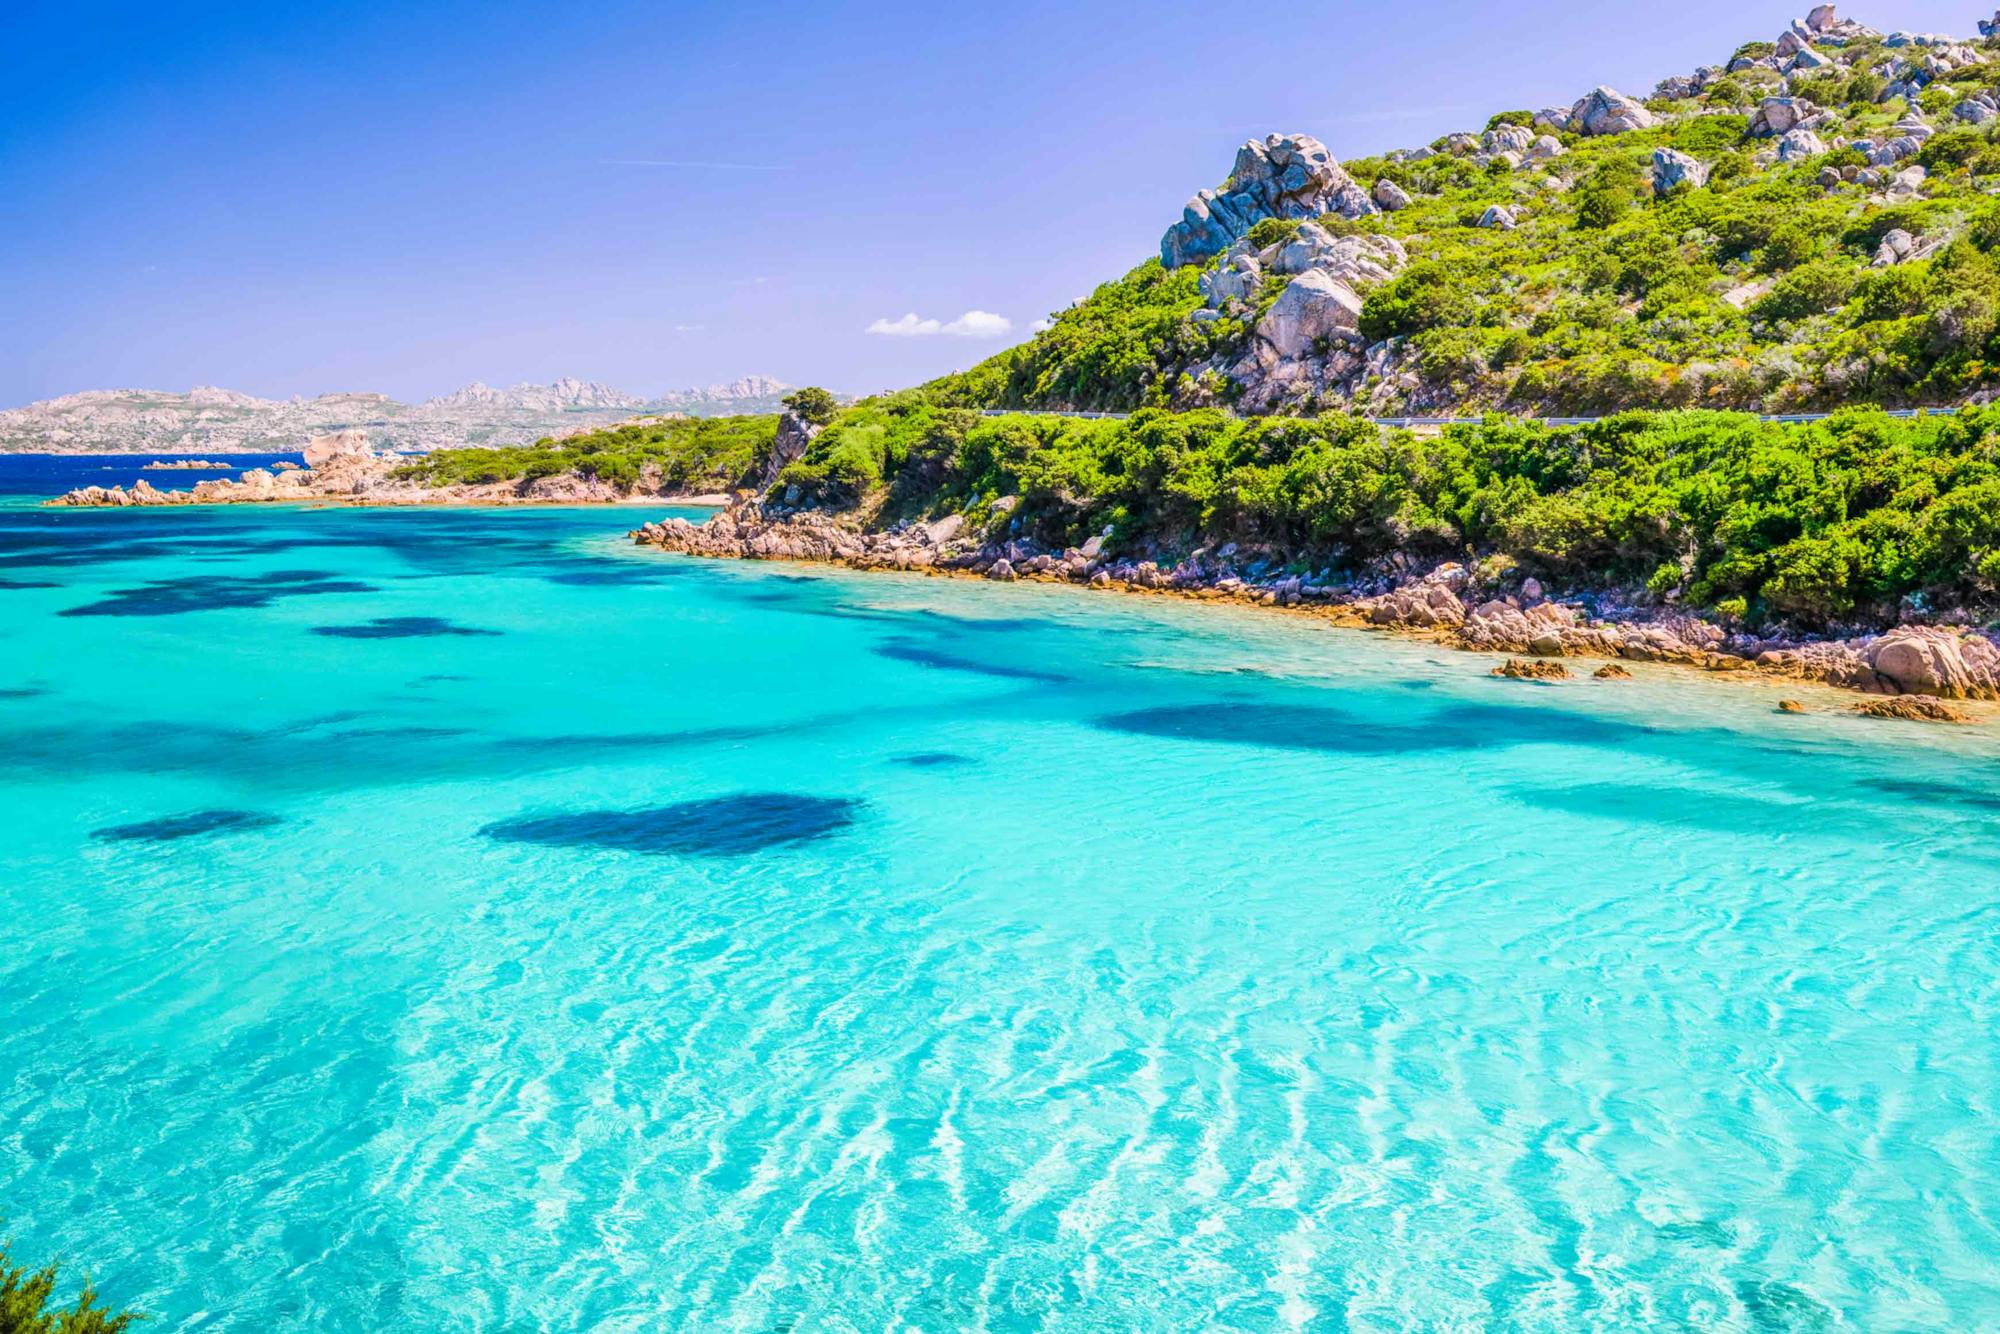 Sardinia Road Trip: from Olbia to beaches and seaside towns